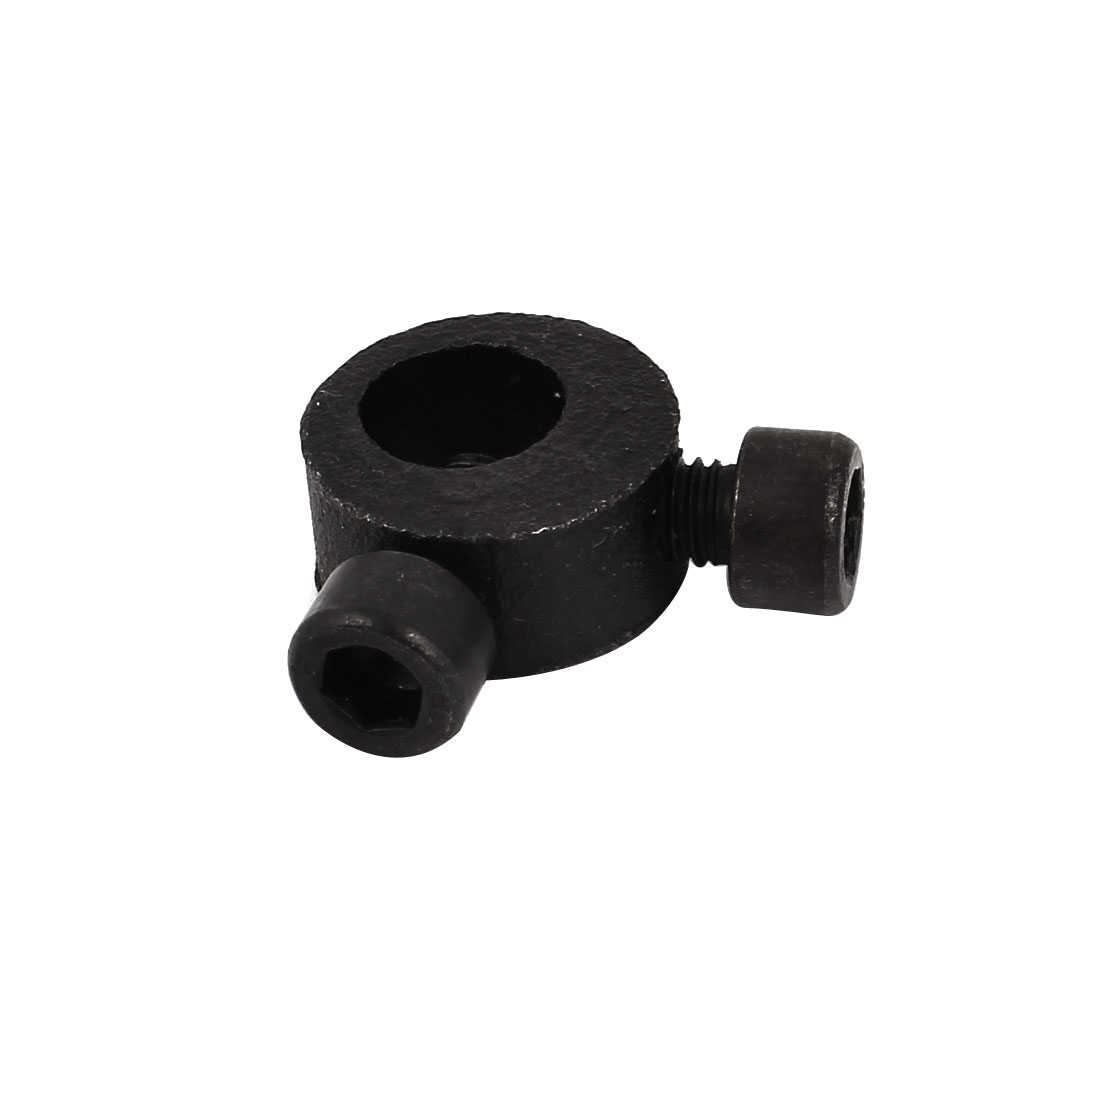 Unique Bargains Black Metal Jig Saw Replacement Parts Collet Lifting Rod for Makita 4304